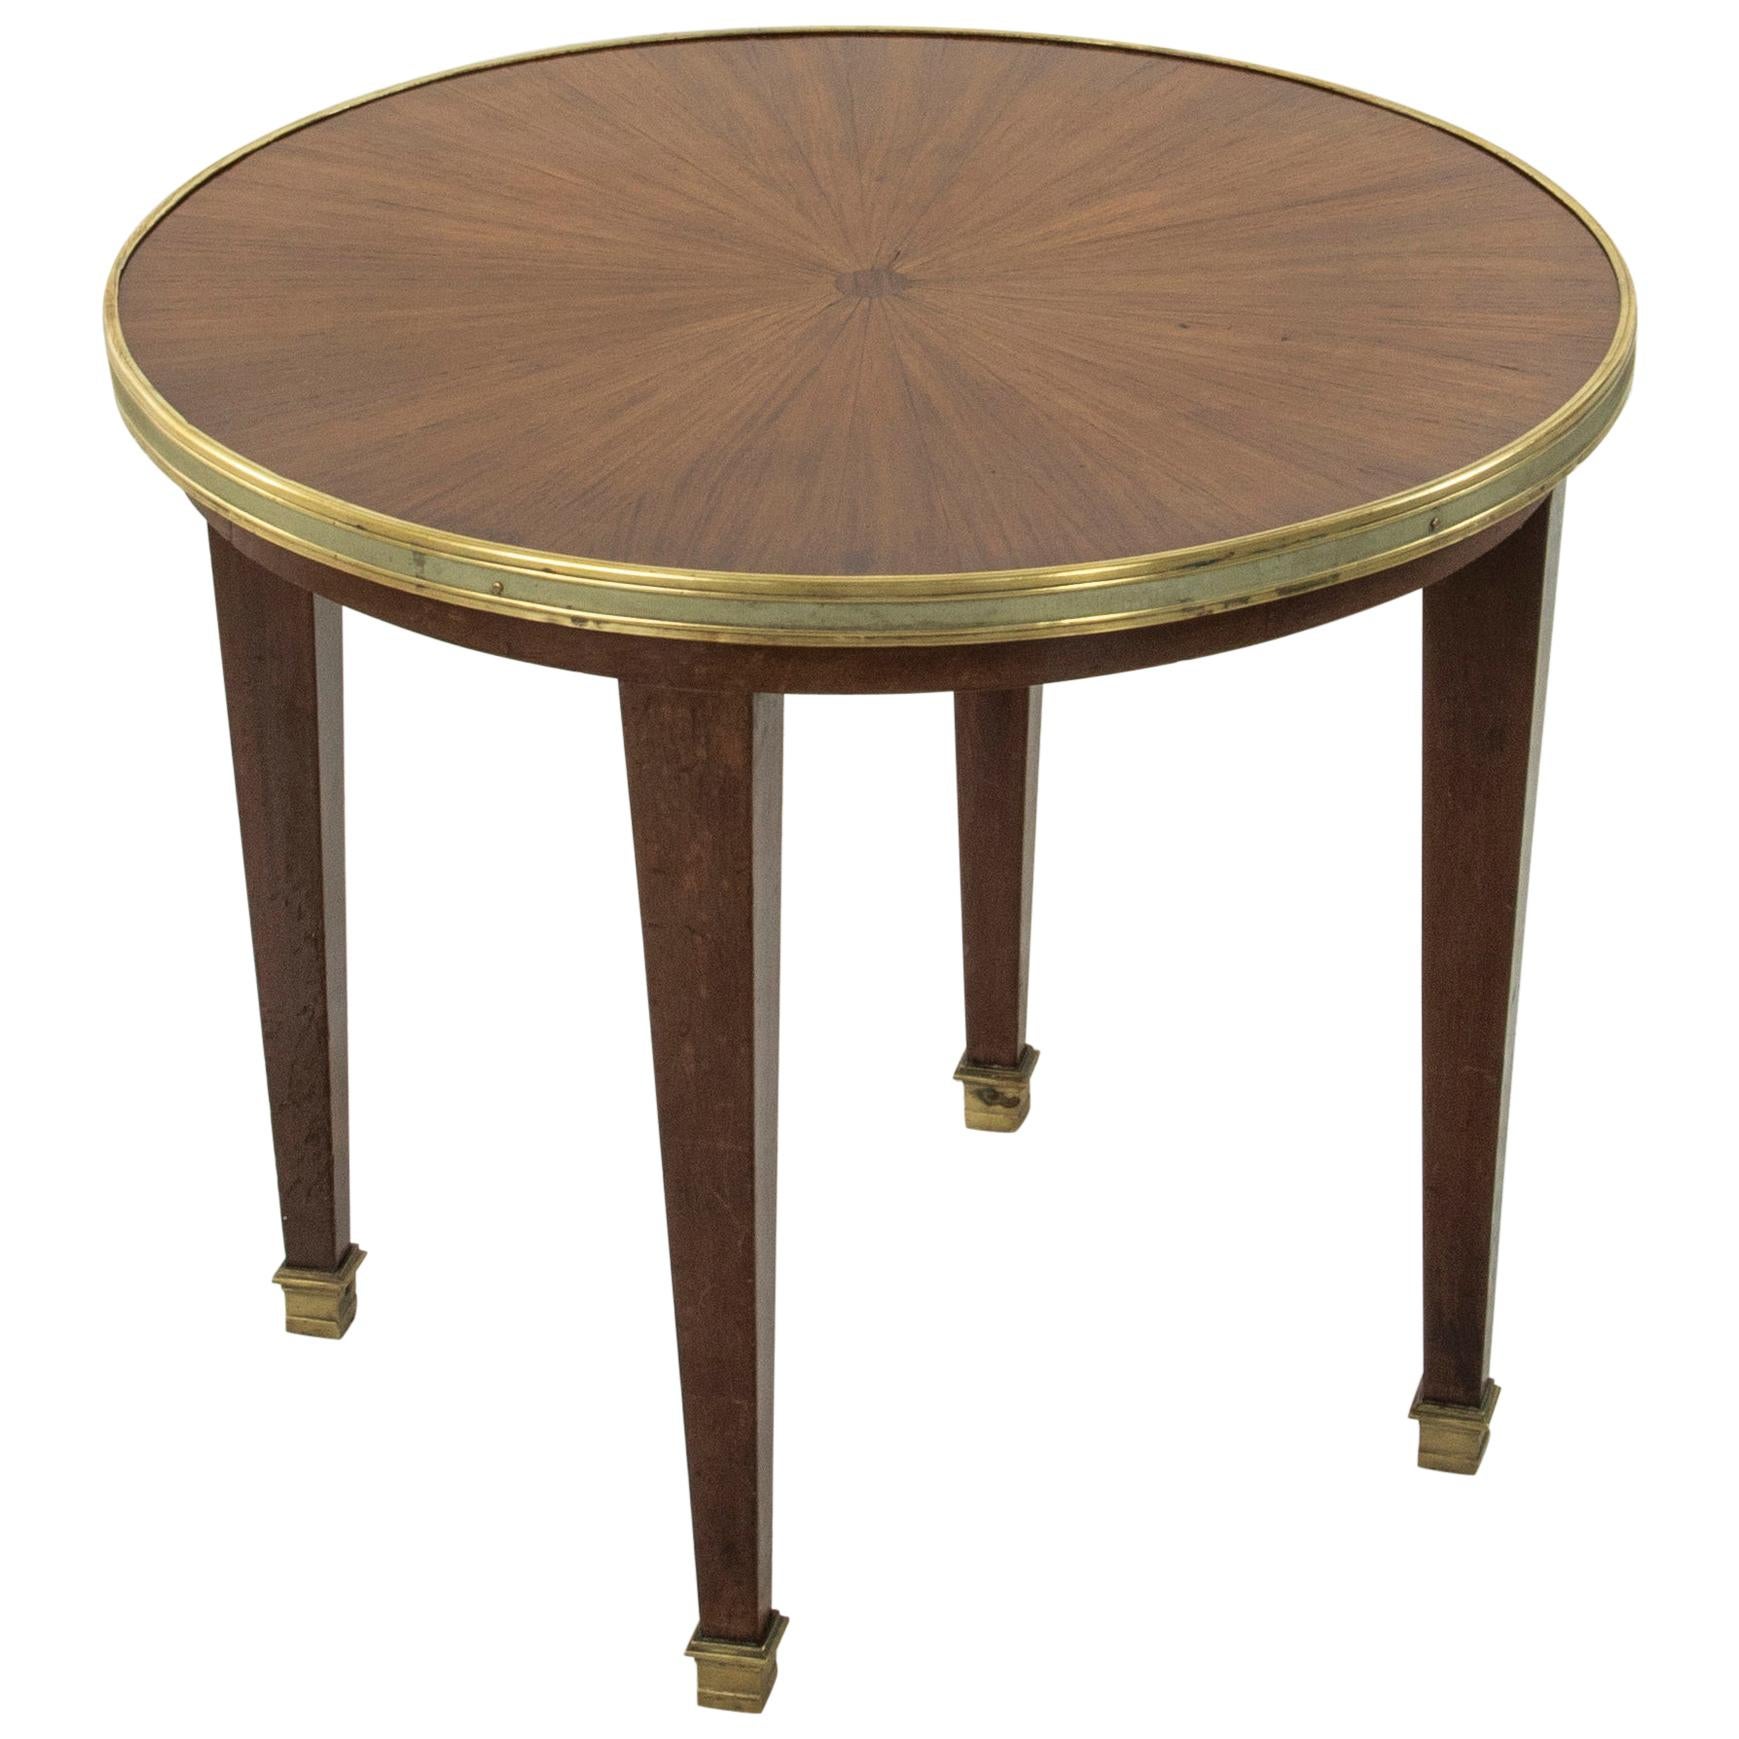 Early 20th Century French Louis XVI Style Walnut Marquetry Sunburst Side Table